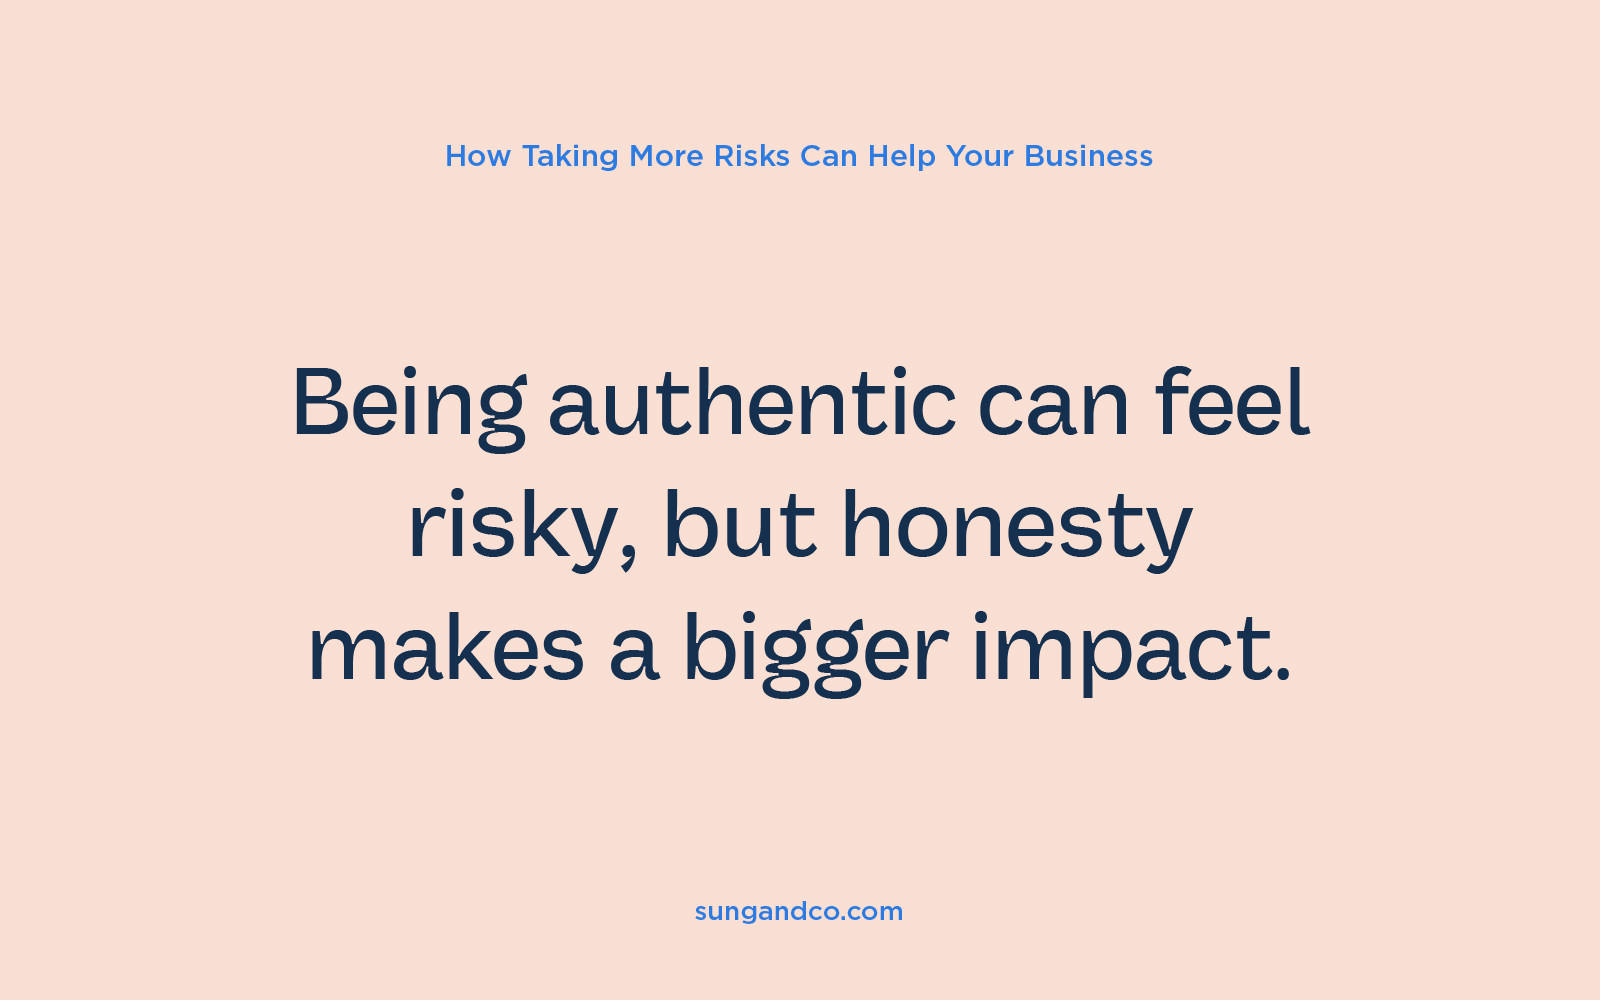 Being authentic can feel risky, but honesty makes a bigger impact – text graphic